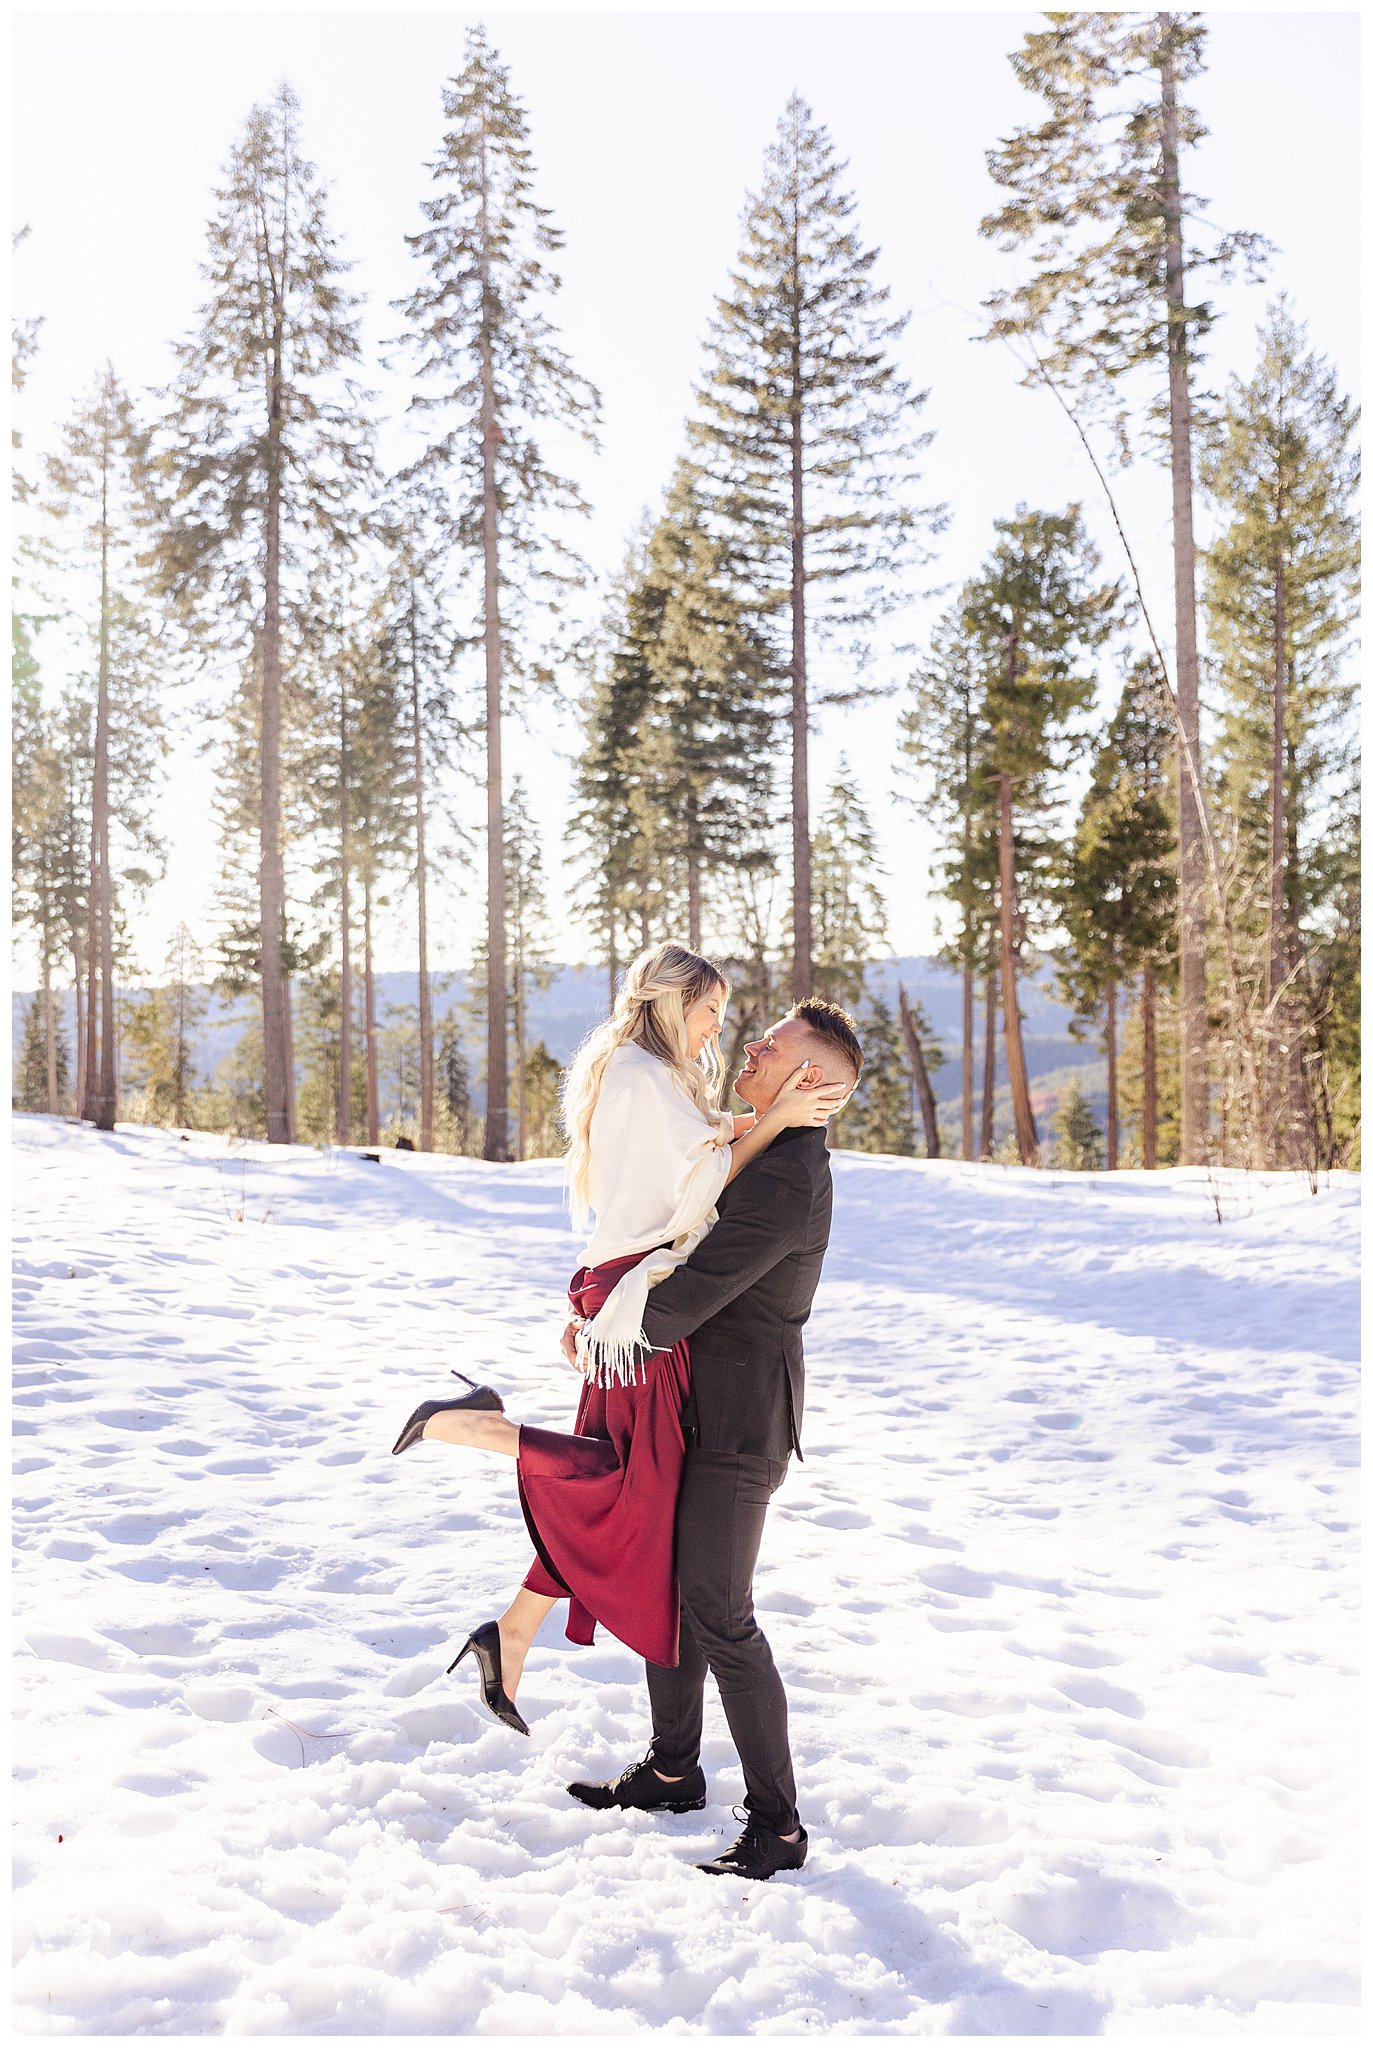 Formal Snowy Engagement Session with Red Dress and Black Jacket | Svetlana + Brett